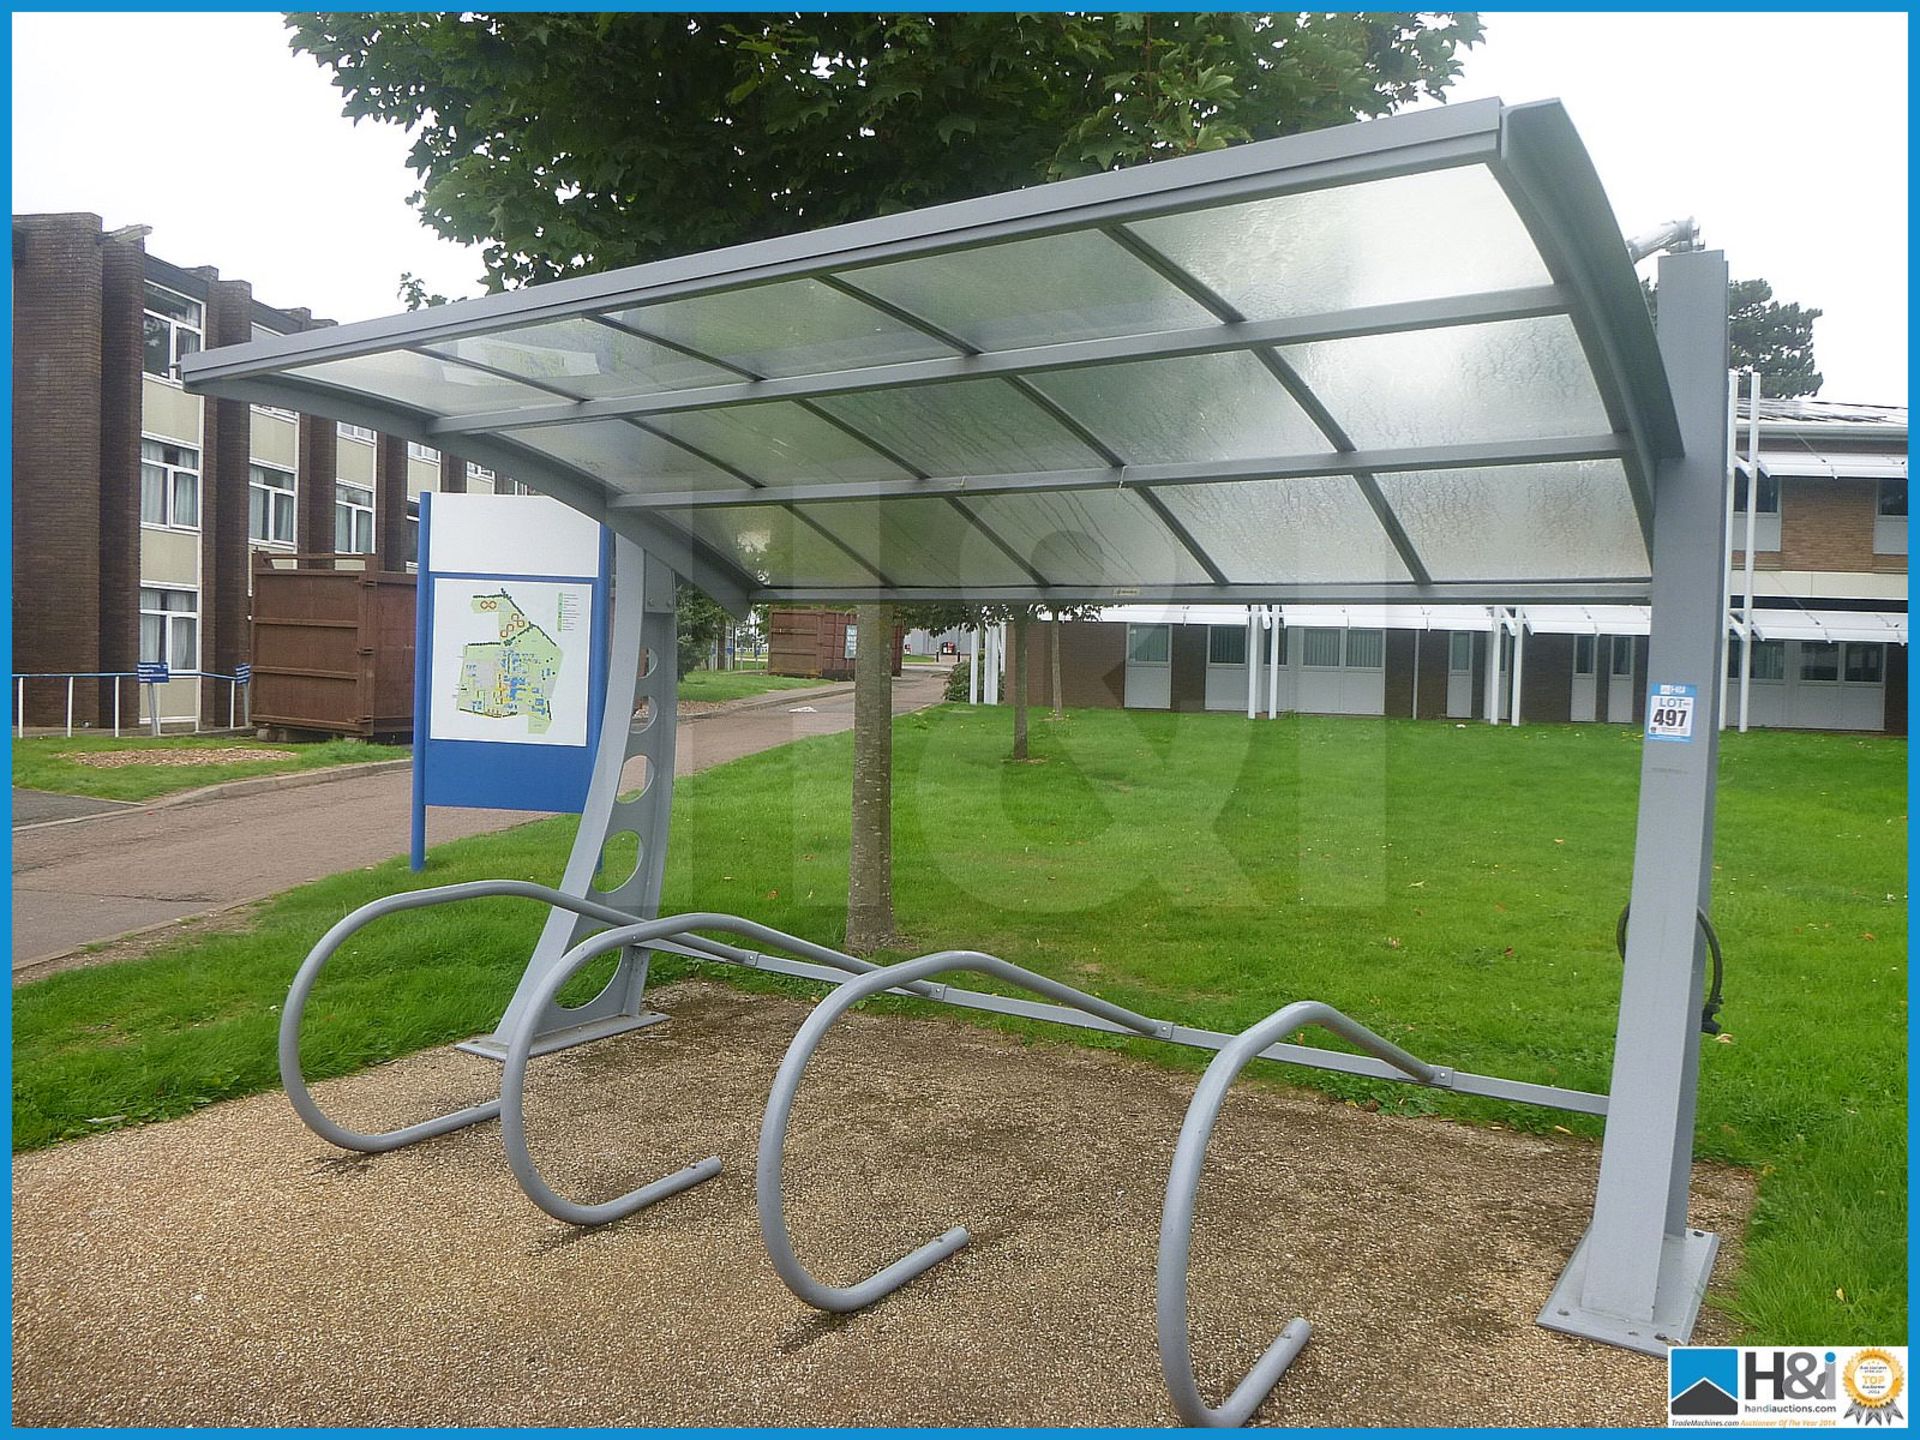 FANTASTIC BIKE SHELTER, GREAT GARDEN FEATURE OPPORTUNITY, BUYER TO DISMANTLE AND REMOVE